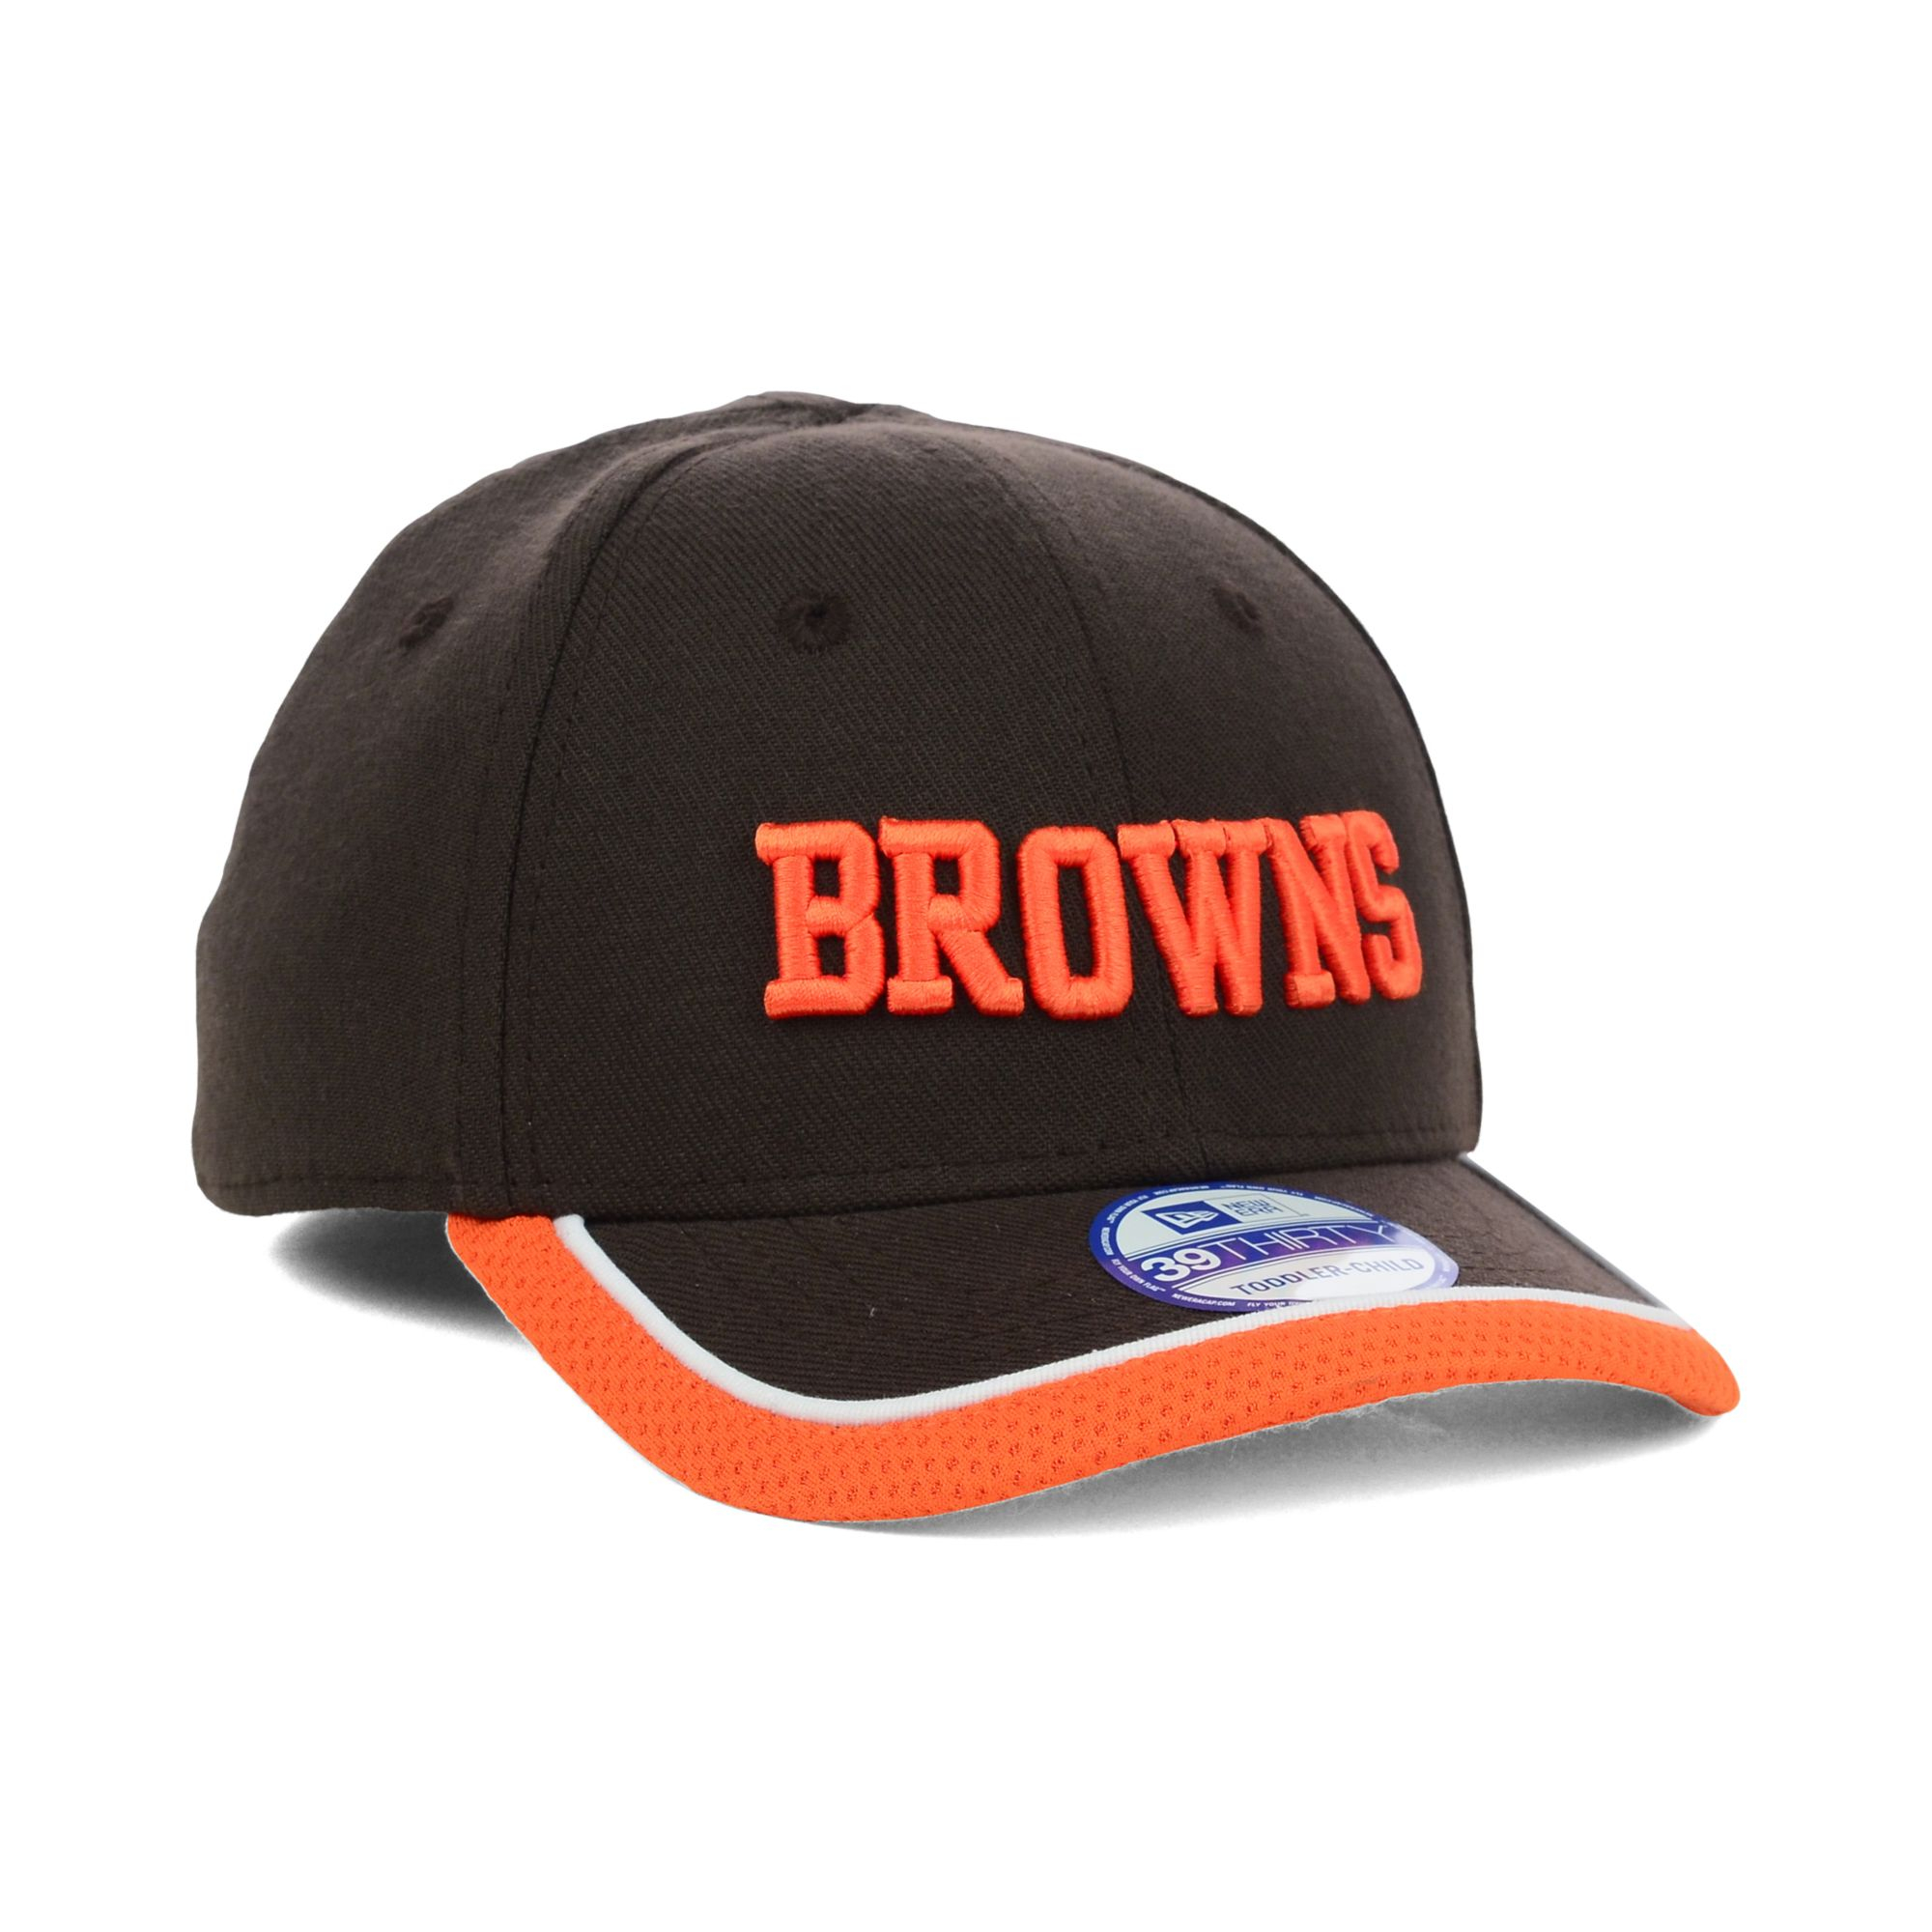 New Era | Cleveland Browns On-field 39thirty Kids Cap Or Toddlers Cap ...